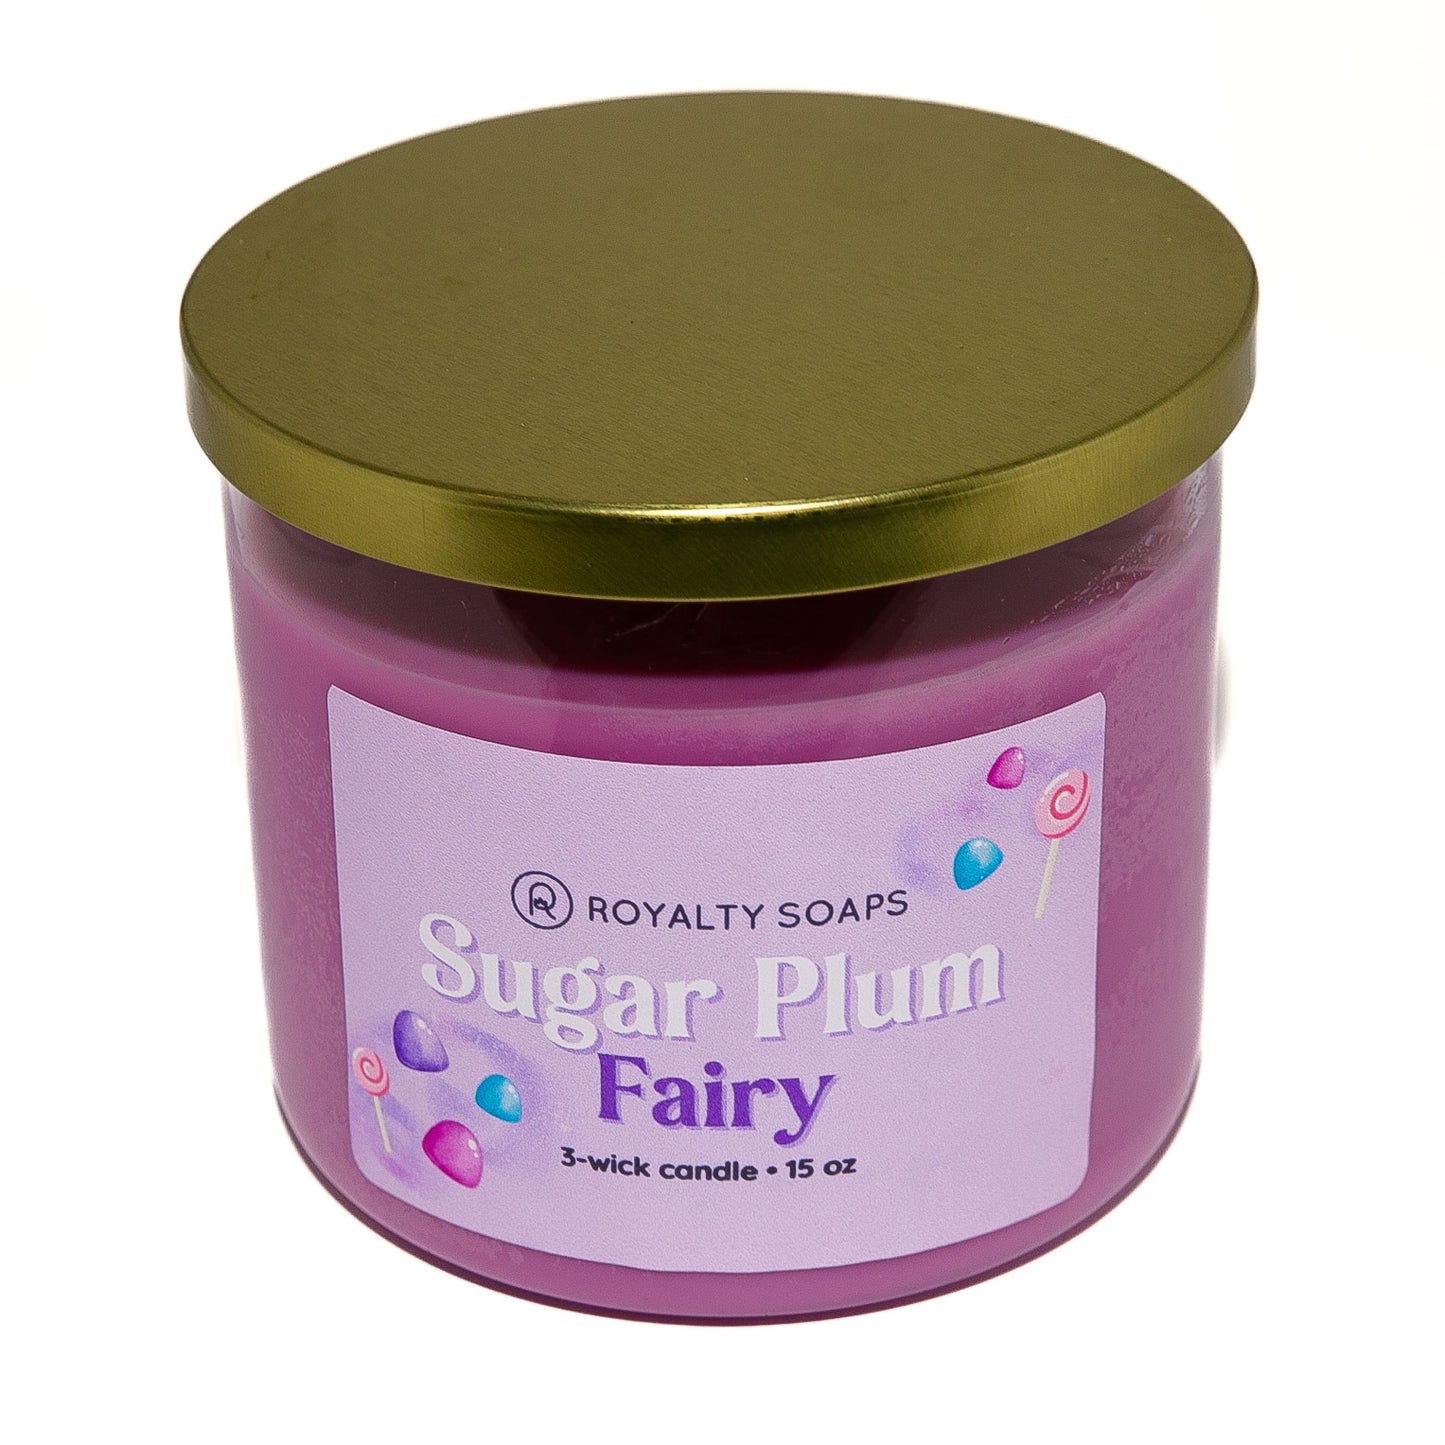 Sugar Plum Fairy 3-Wick Soy Candle